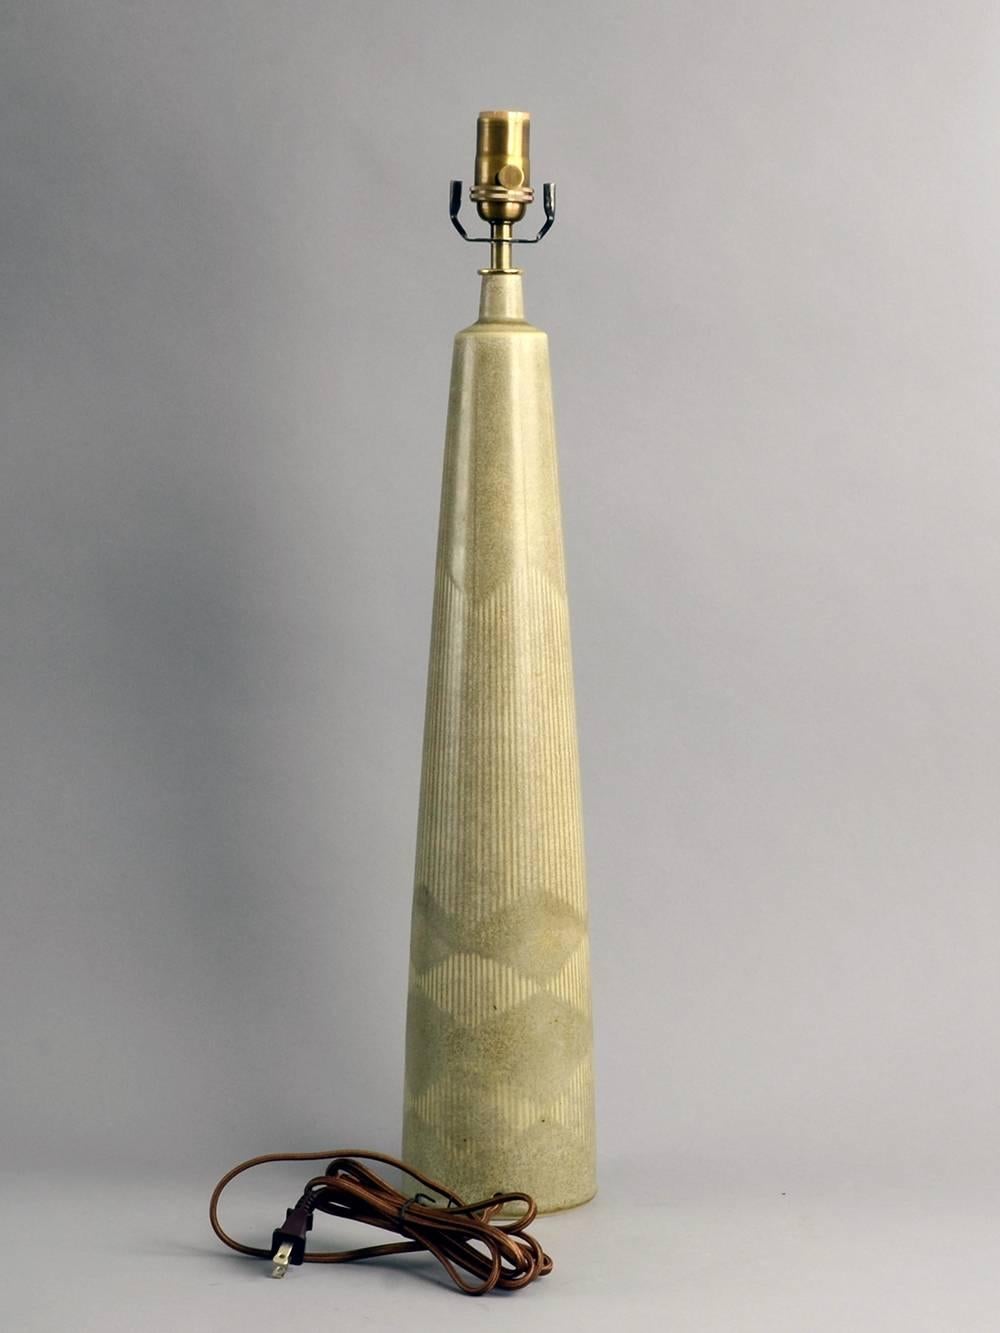 Per and Annelise Linnemann-Schmidt for Palshus, Denmark

Stoneware lamp with matte olive glaze, 1950s-1960s.
Measures: Height to top of socket 25 3/4